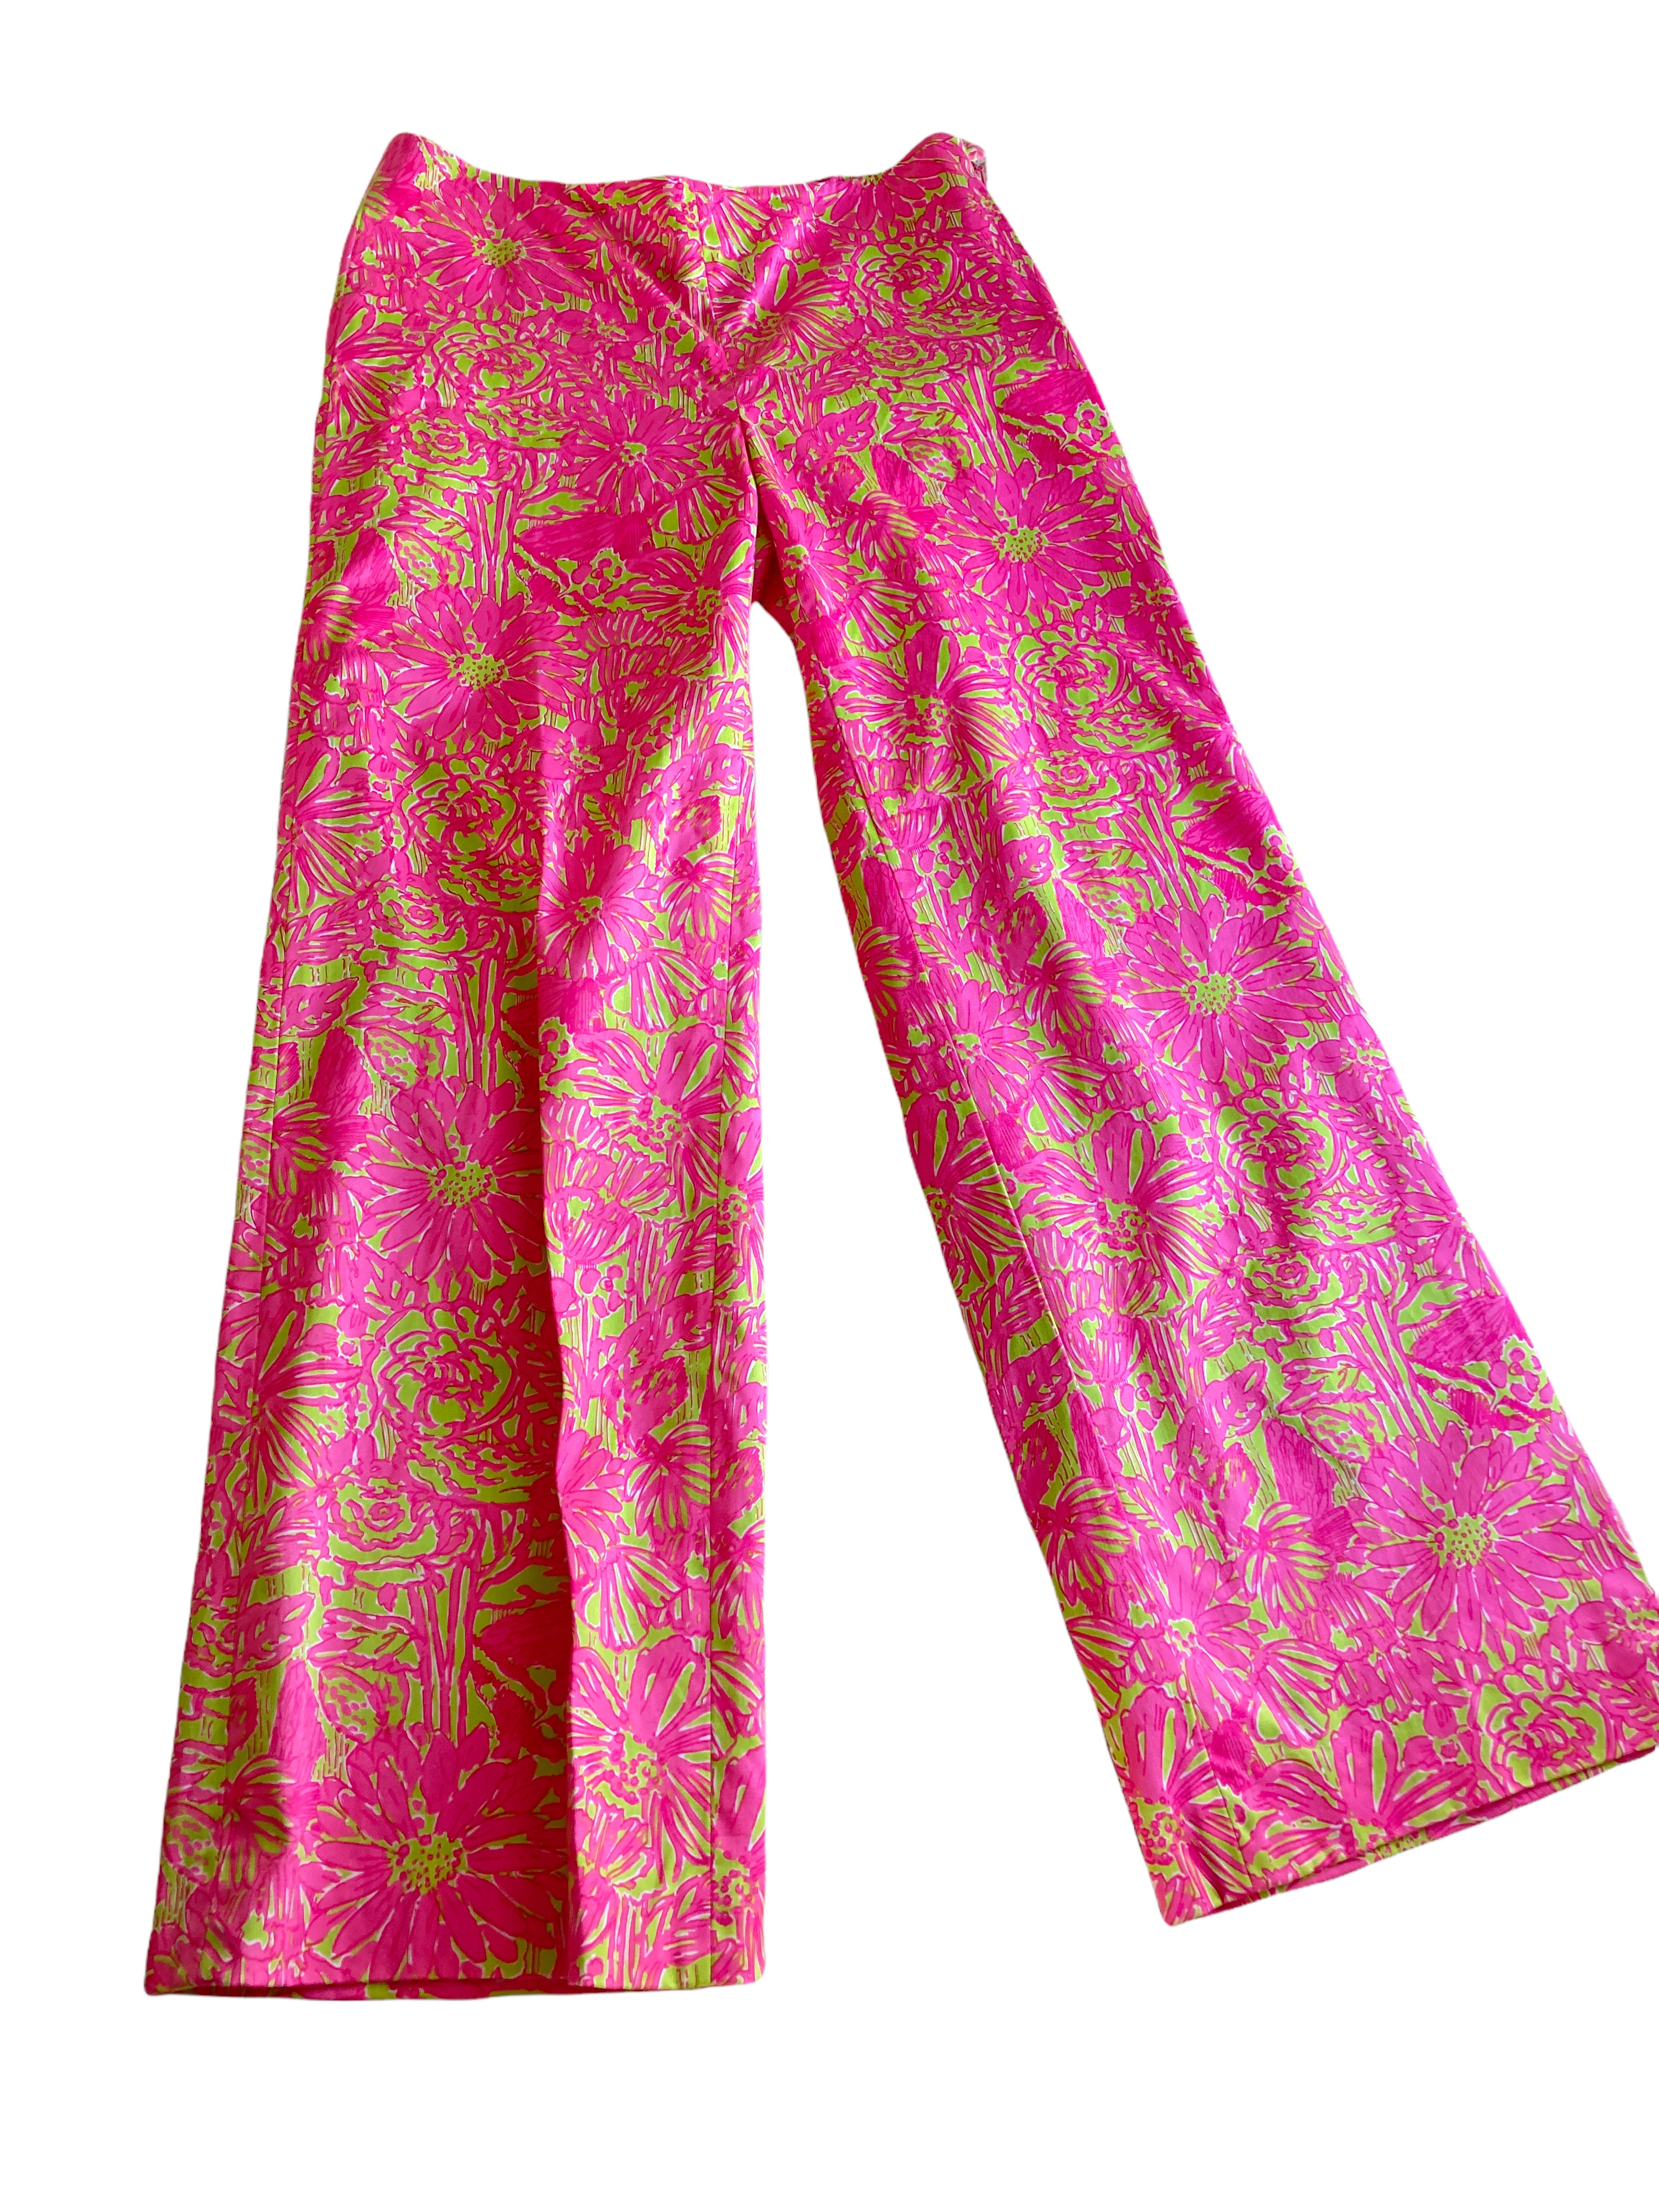 Lilly Pulitzer Pants, 6